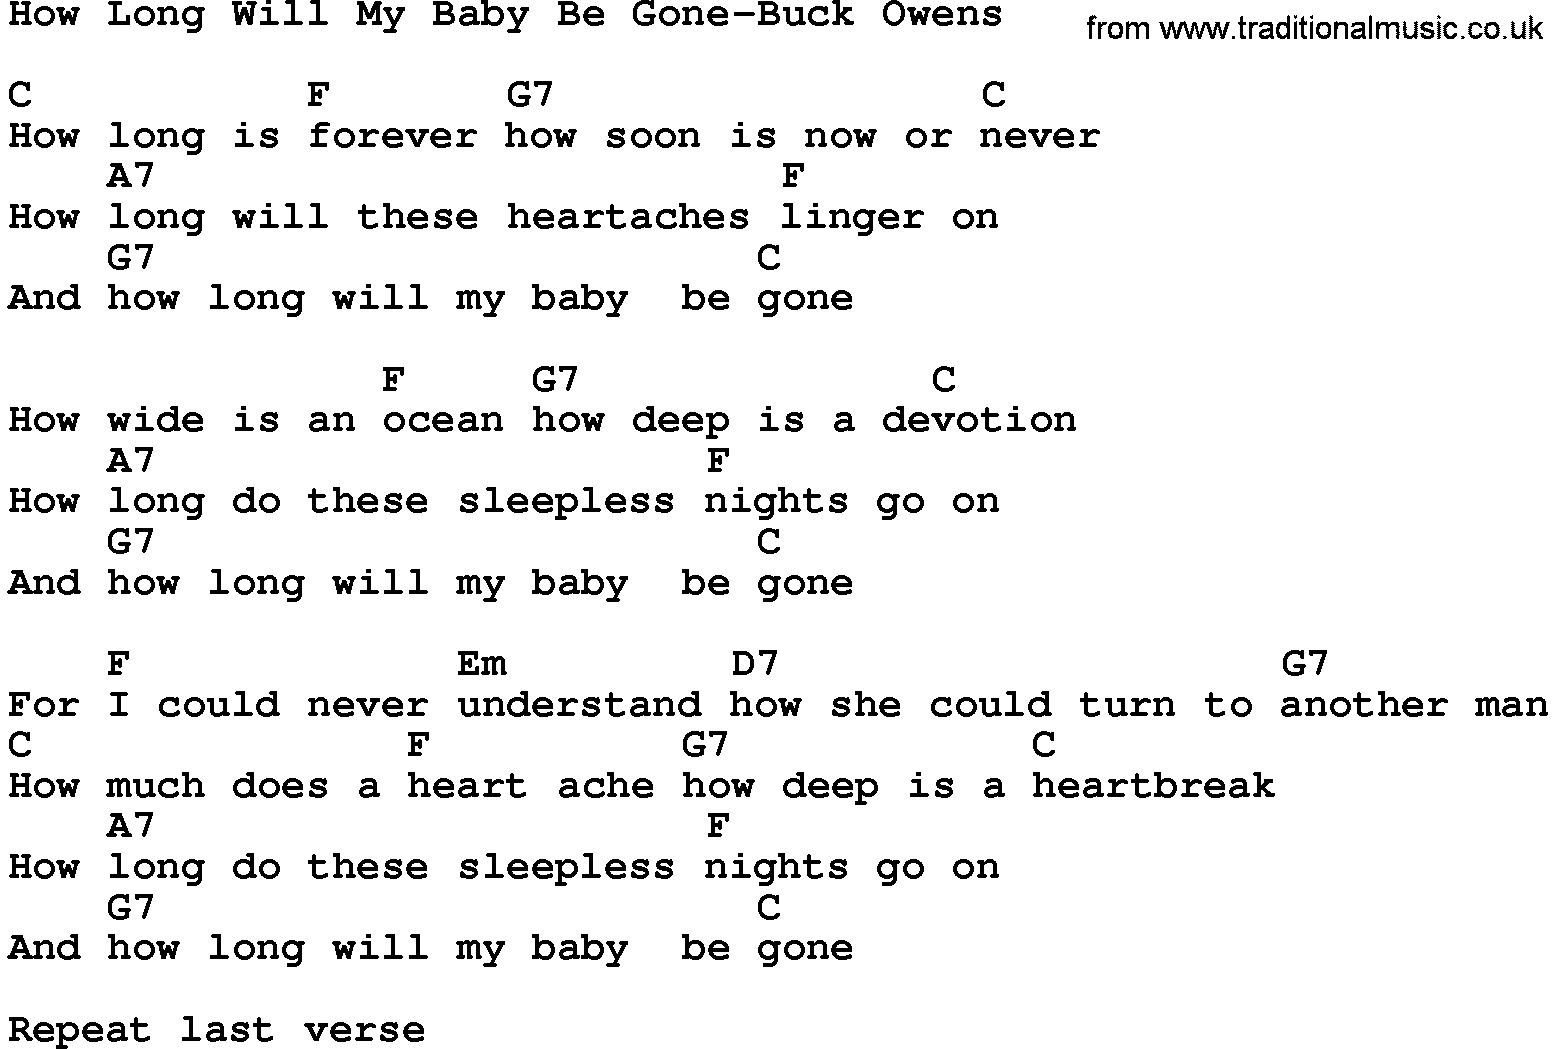 Country music song: How Long Will My Baby Be Gone-Buck Owens lyrics and chords